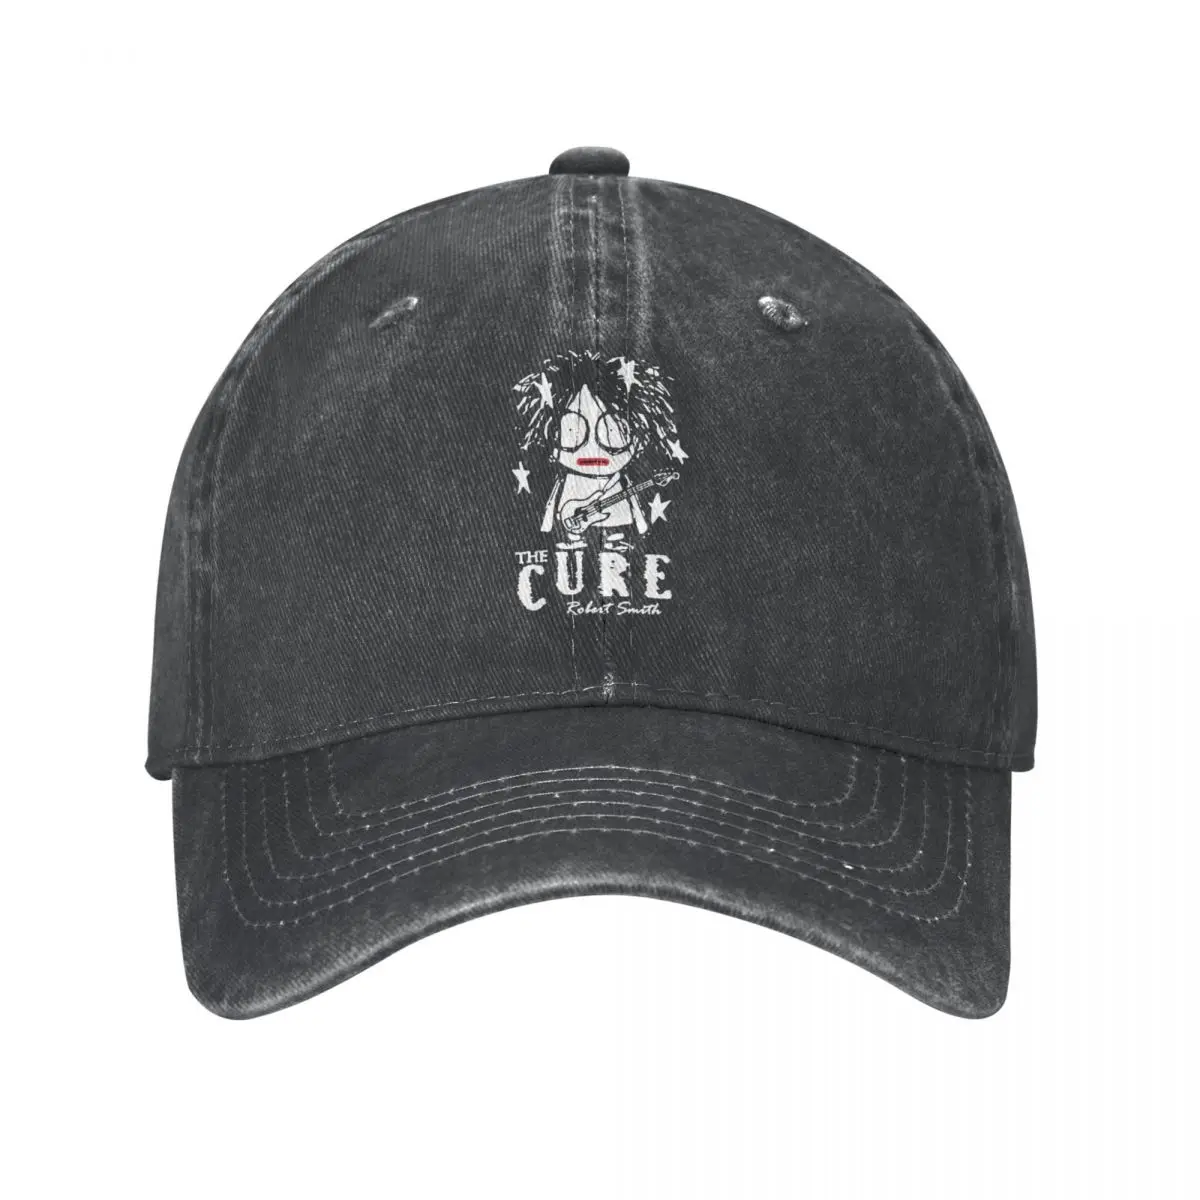 Robert Smith The Cure Unisex Style Baseball Caps Distressed Cotton Caps Hat Vintage Outdoor Summer Headwear